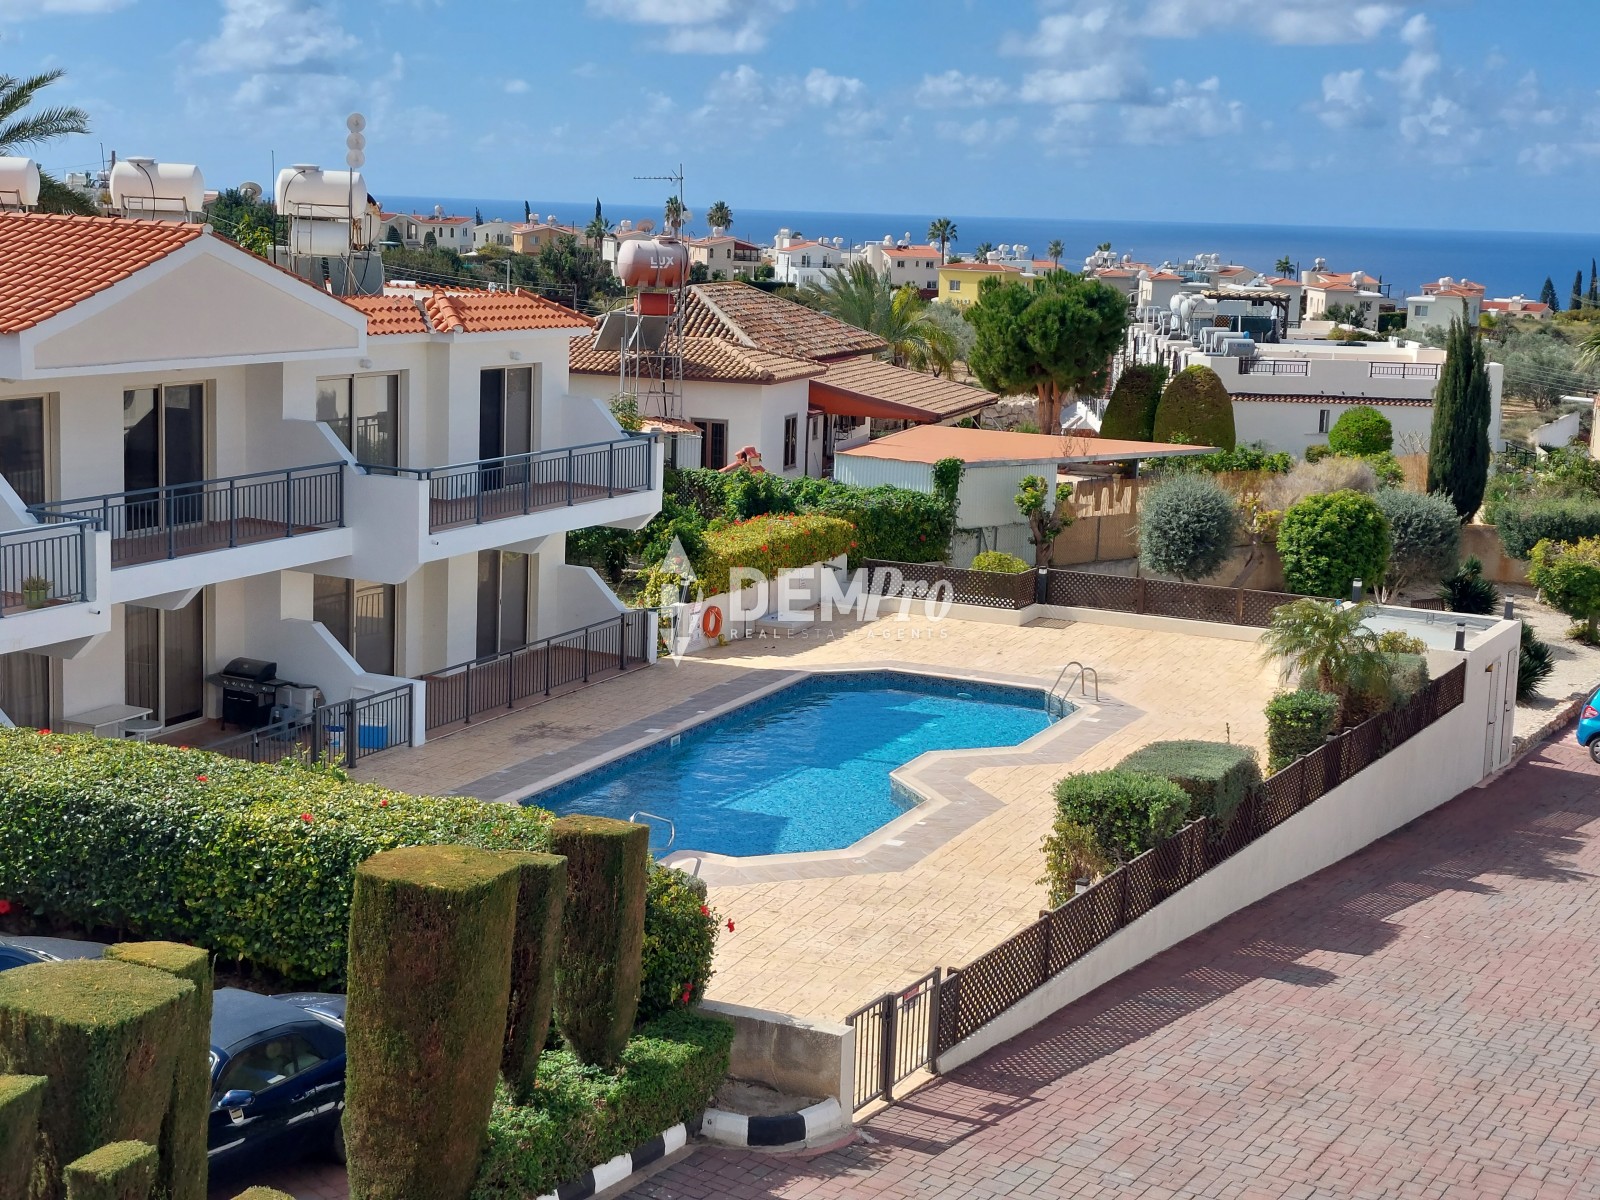 Apartment For Sale in Peyia, Paphos - DP4008